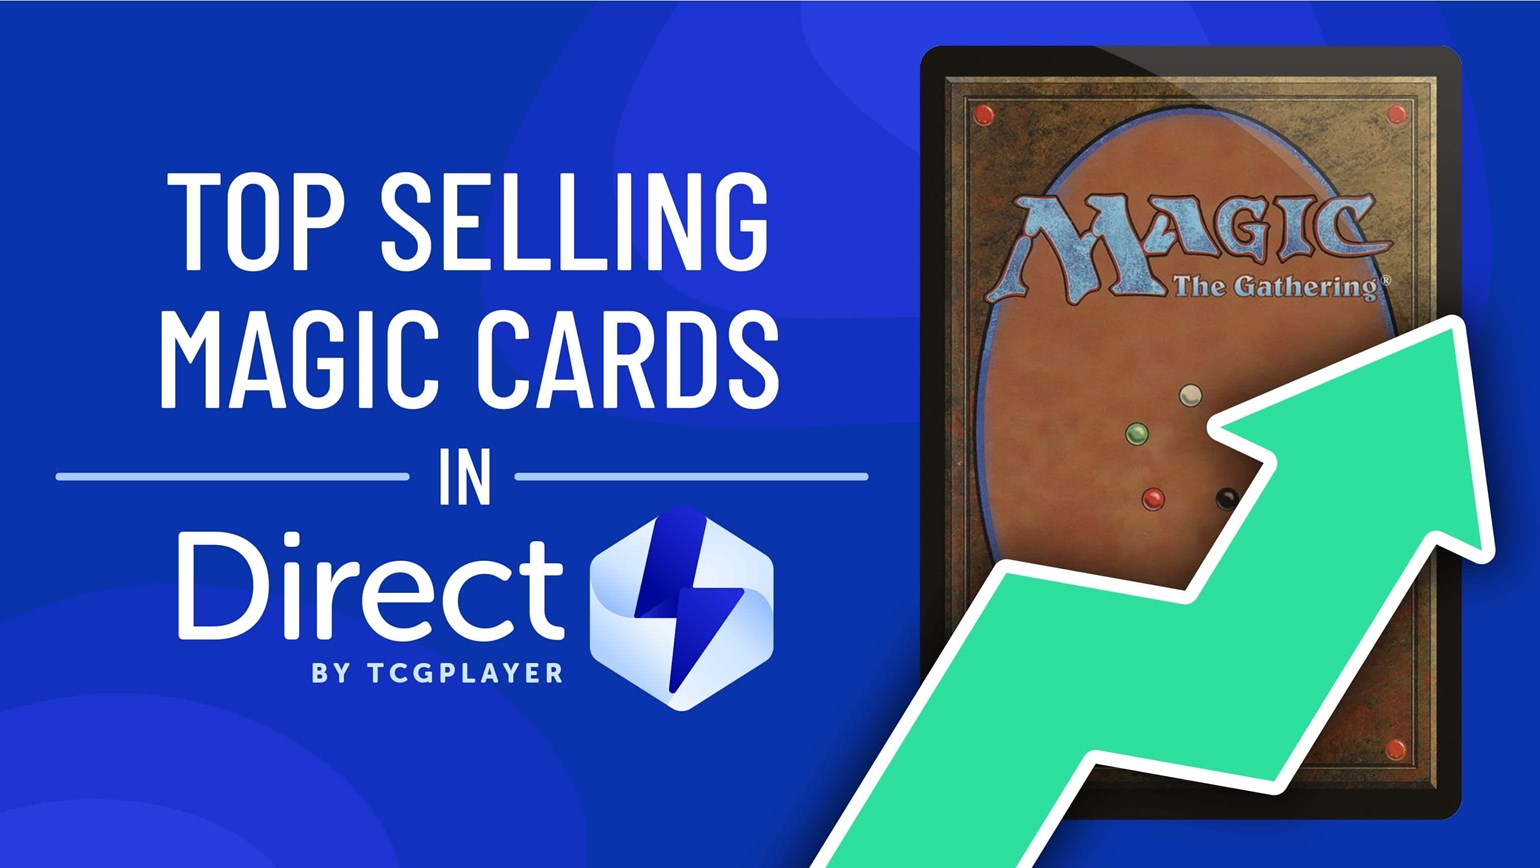 July Top Selling Magic: The Gathering Cards Under $25 in Direct by TCGplayer